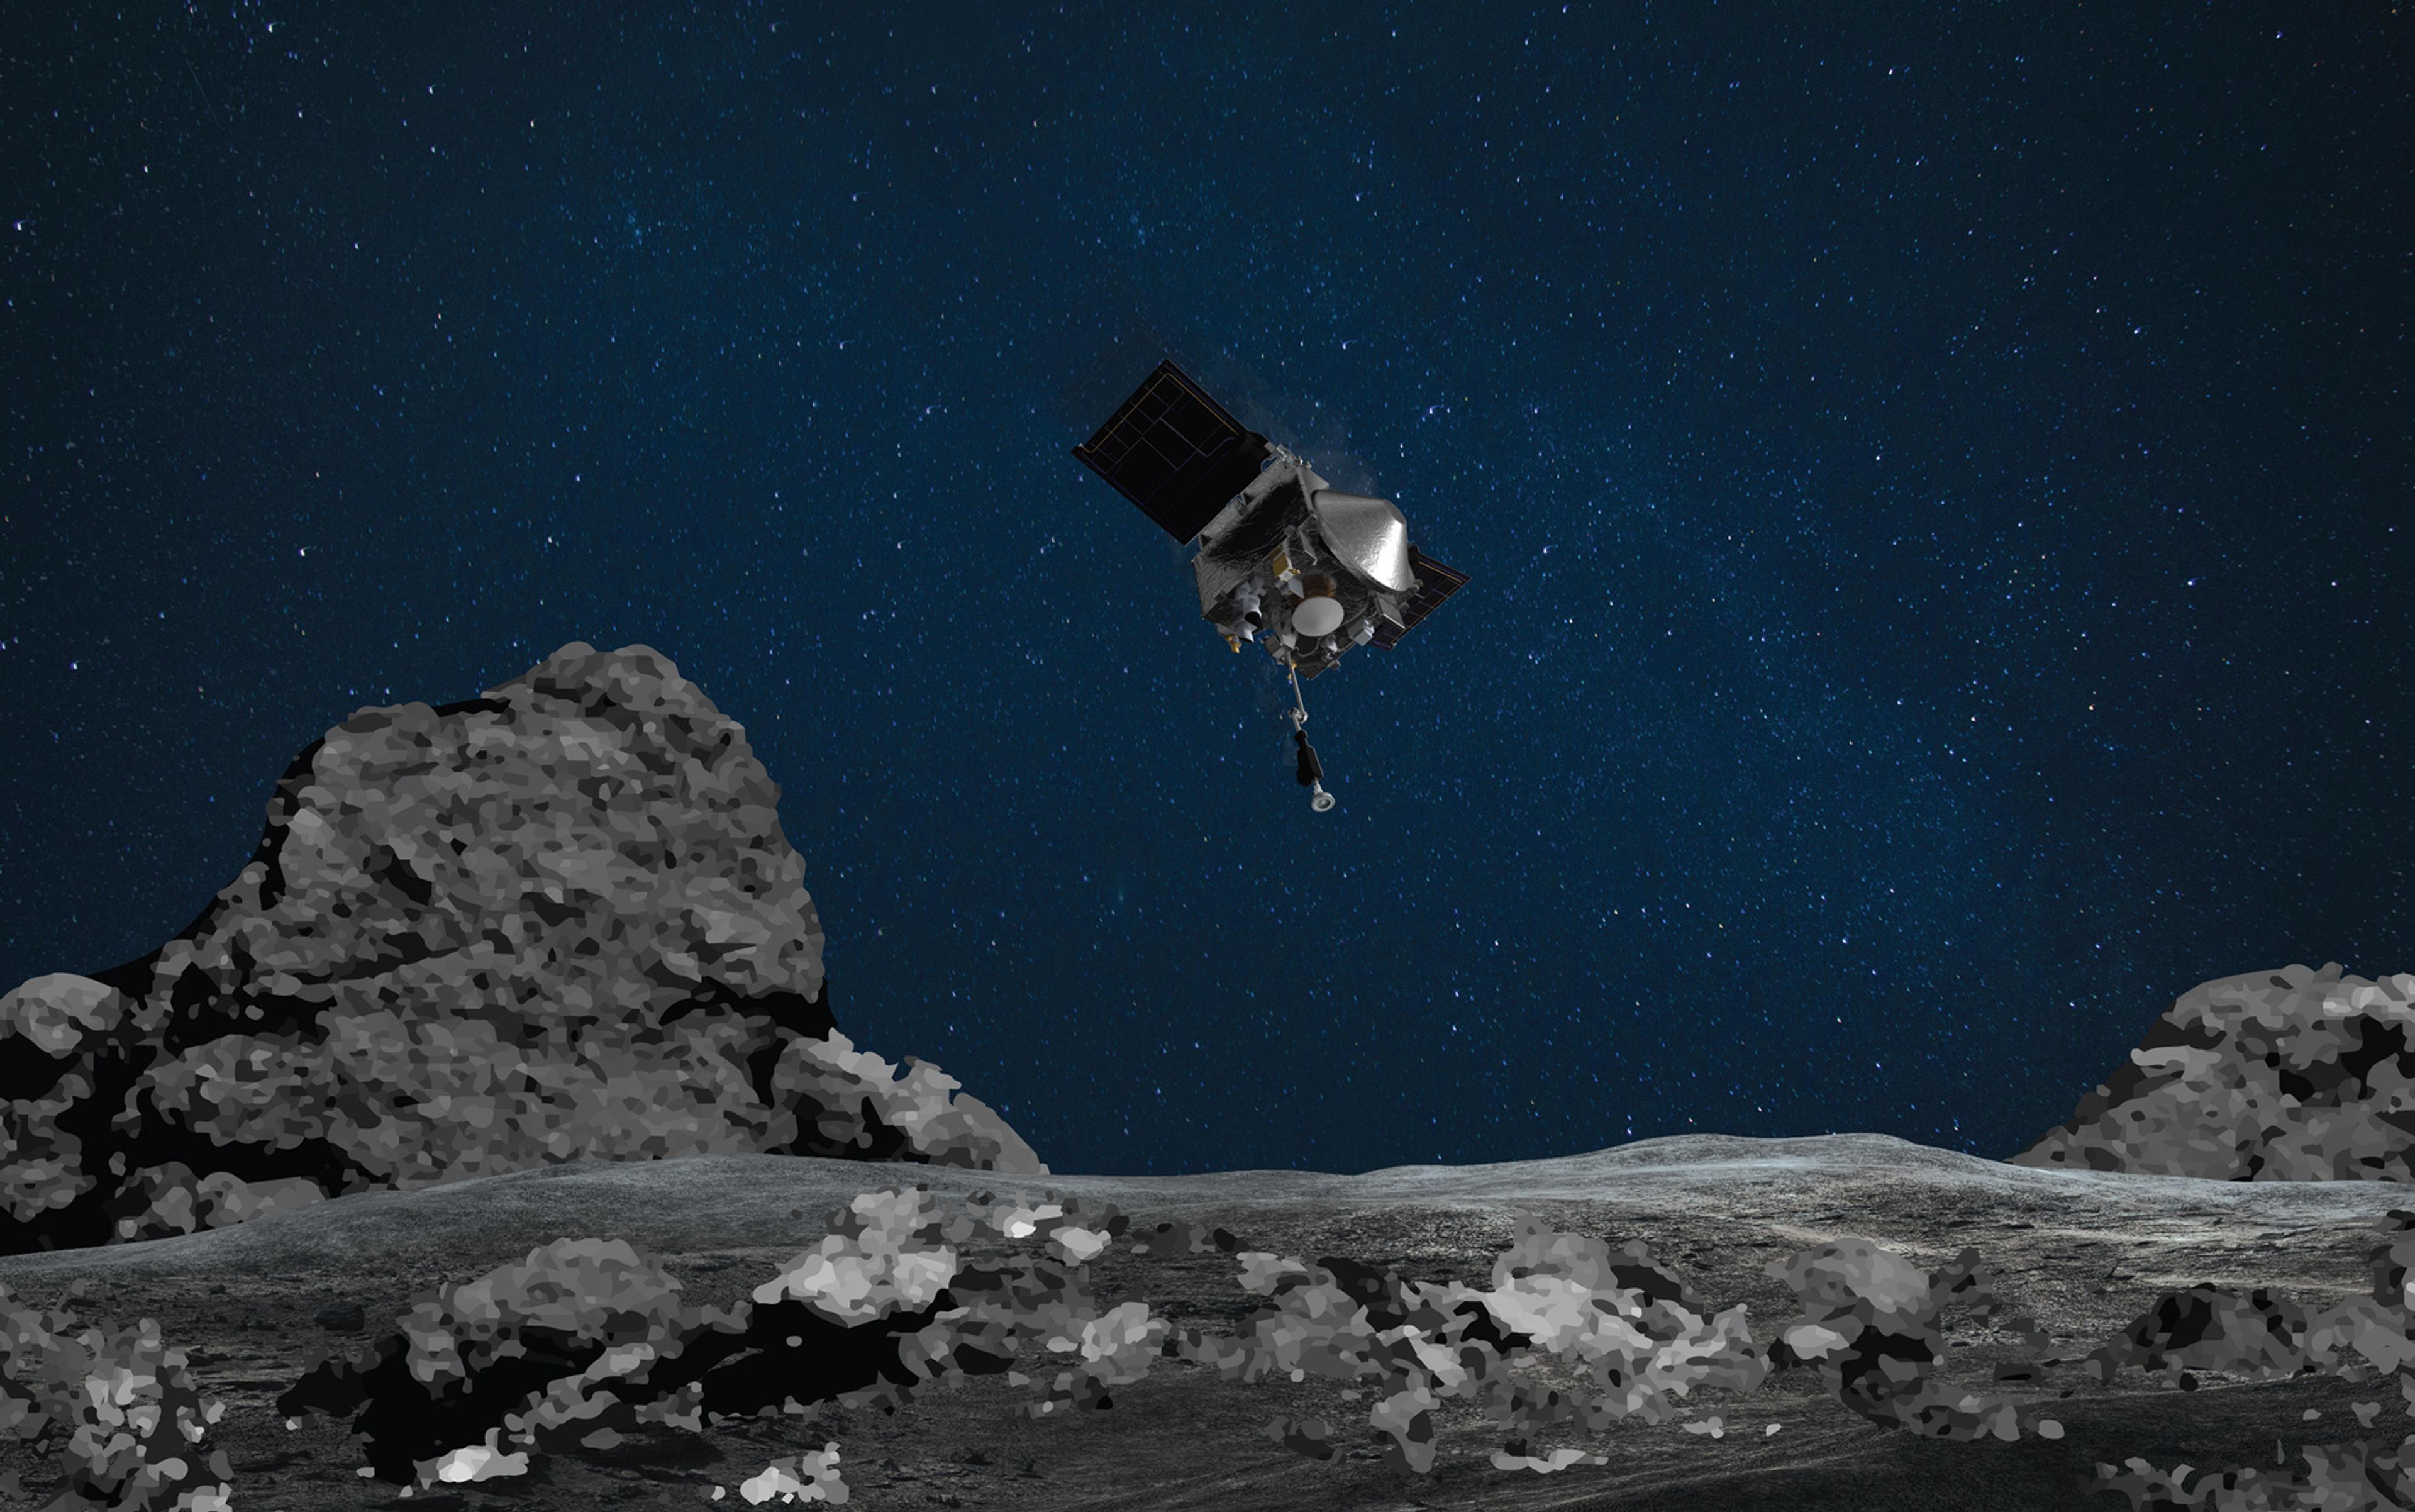 Asteroid mining could pay for space exploration and adventure